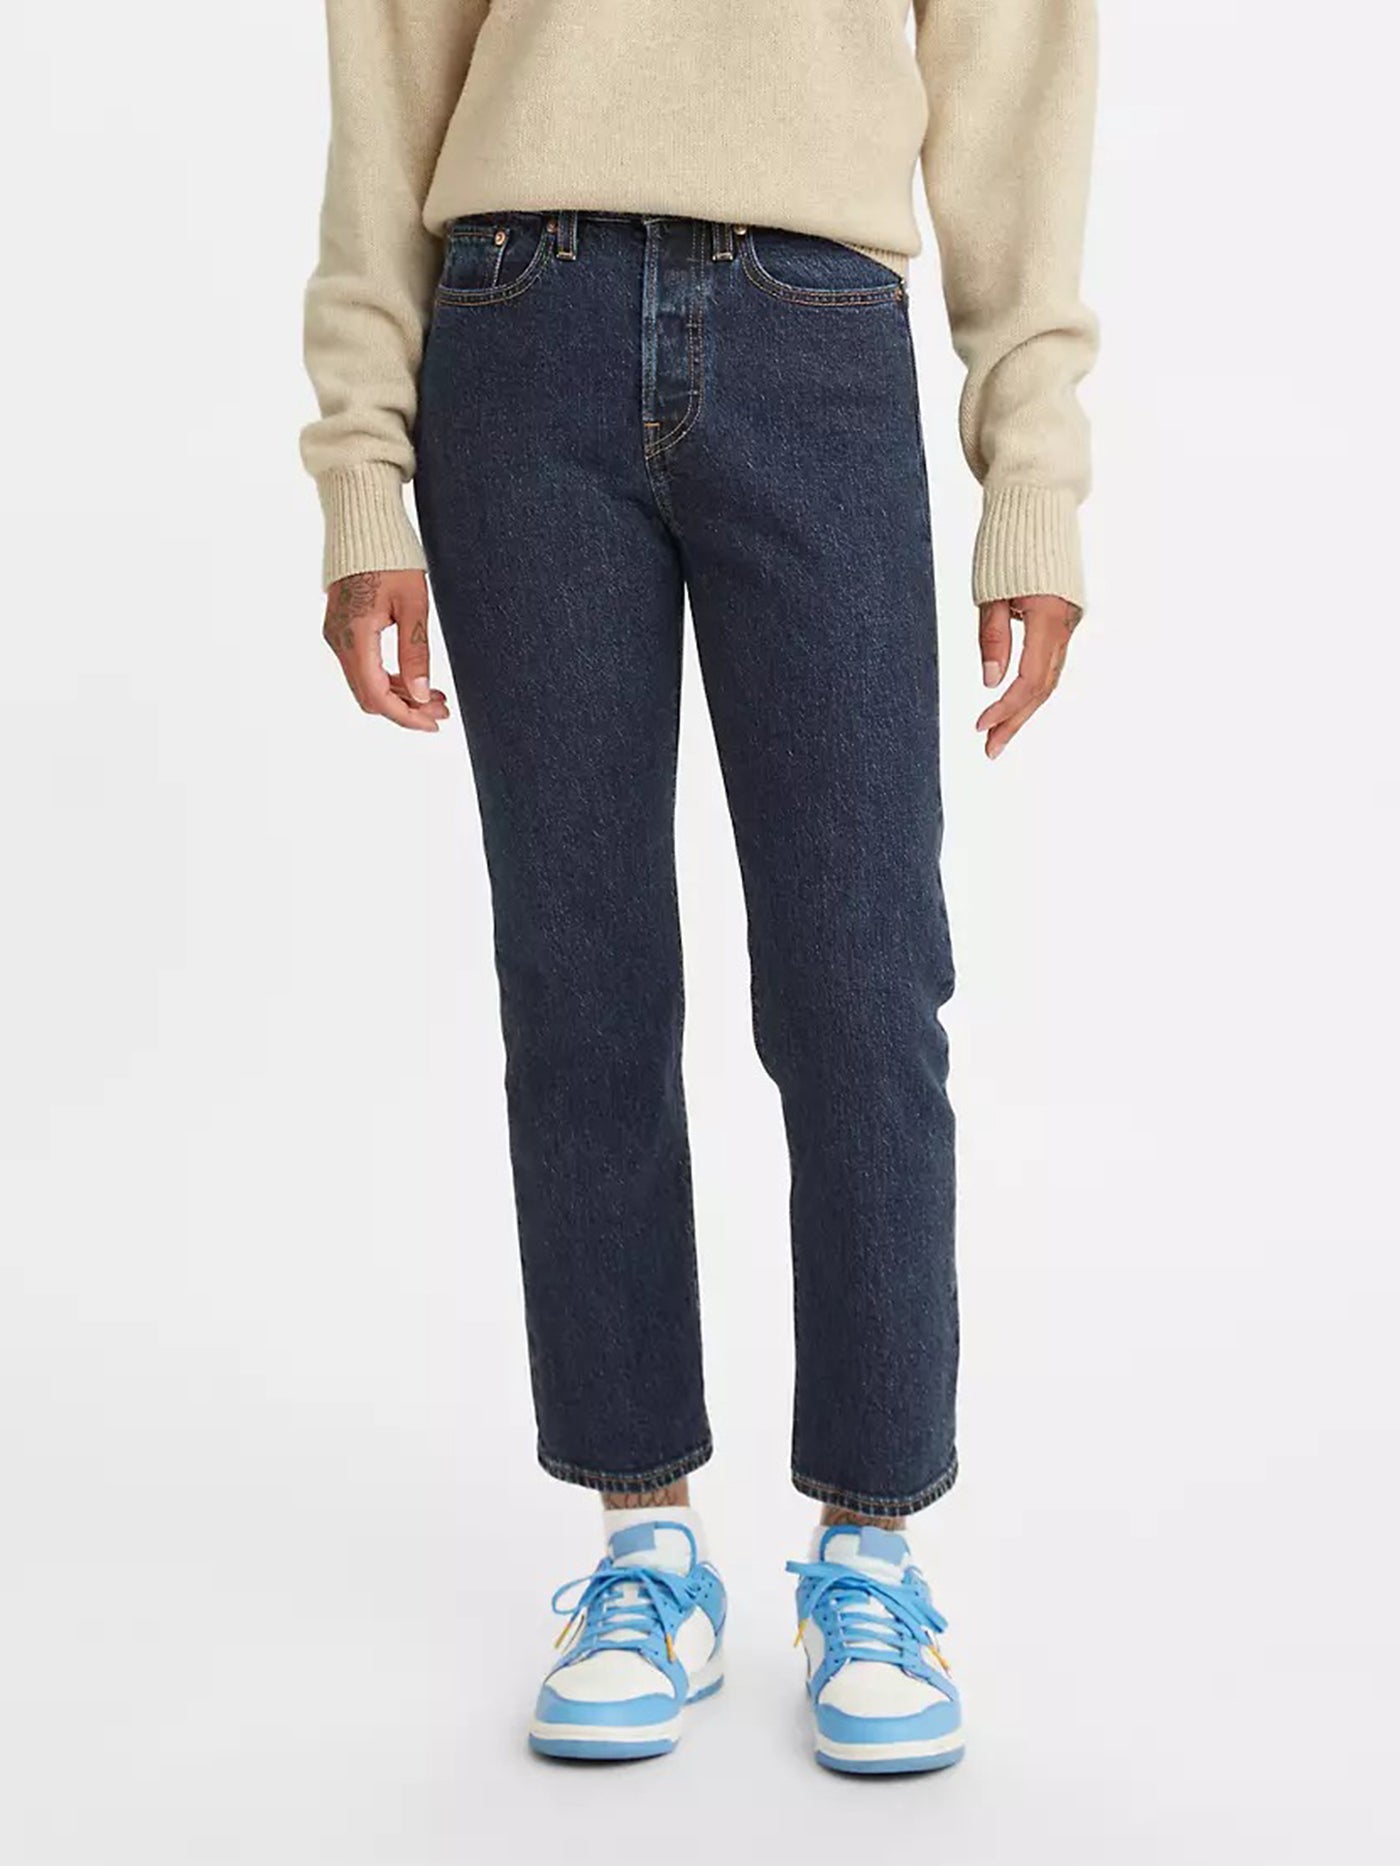 Levis Wedgie Straight Fit Jeans | EMPIRE